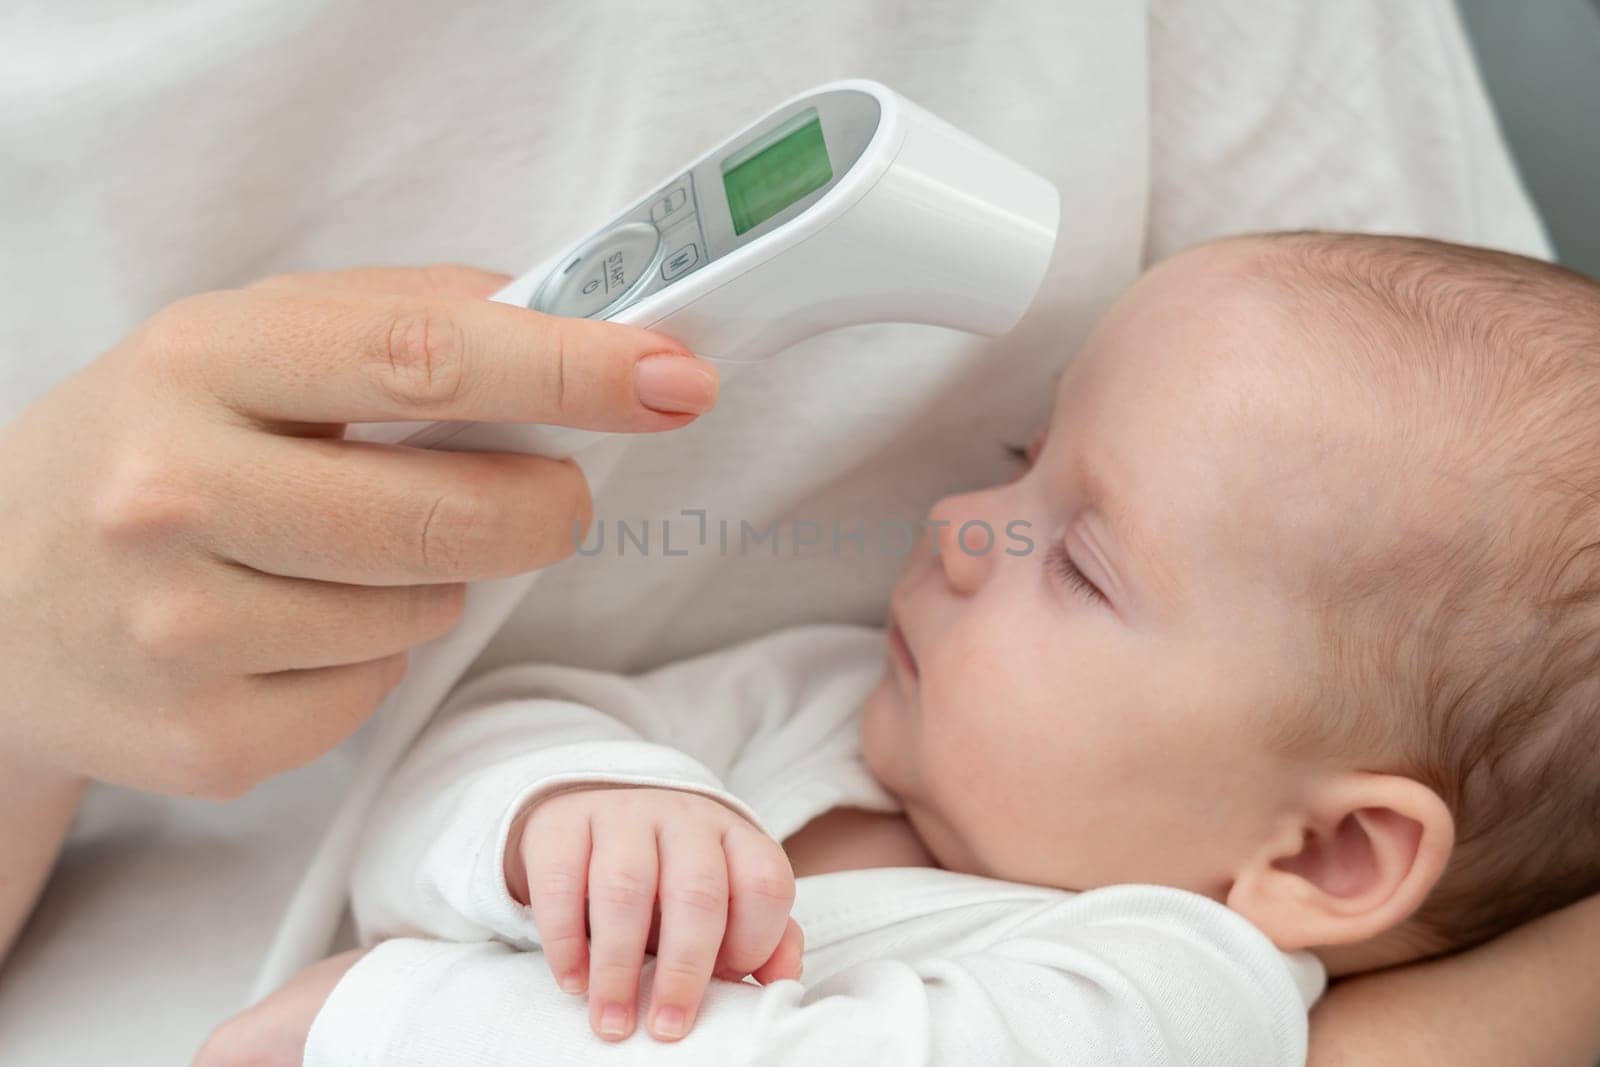 A caring mother uses an electronic thermometer, pointing it to her newborn's forehead to measure